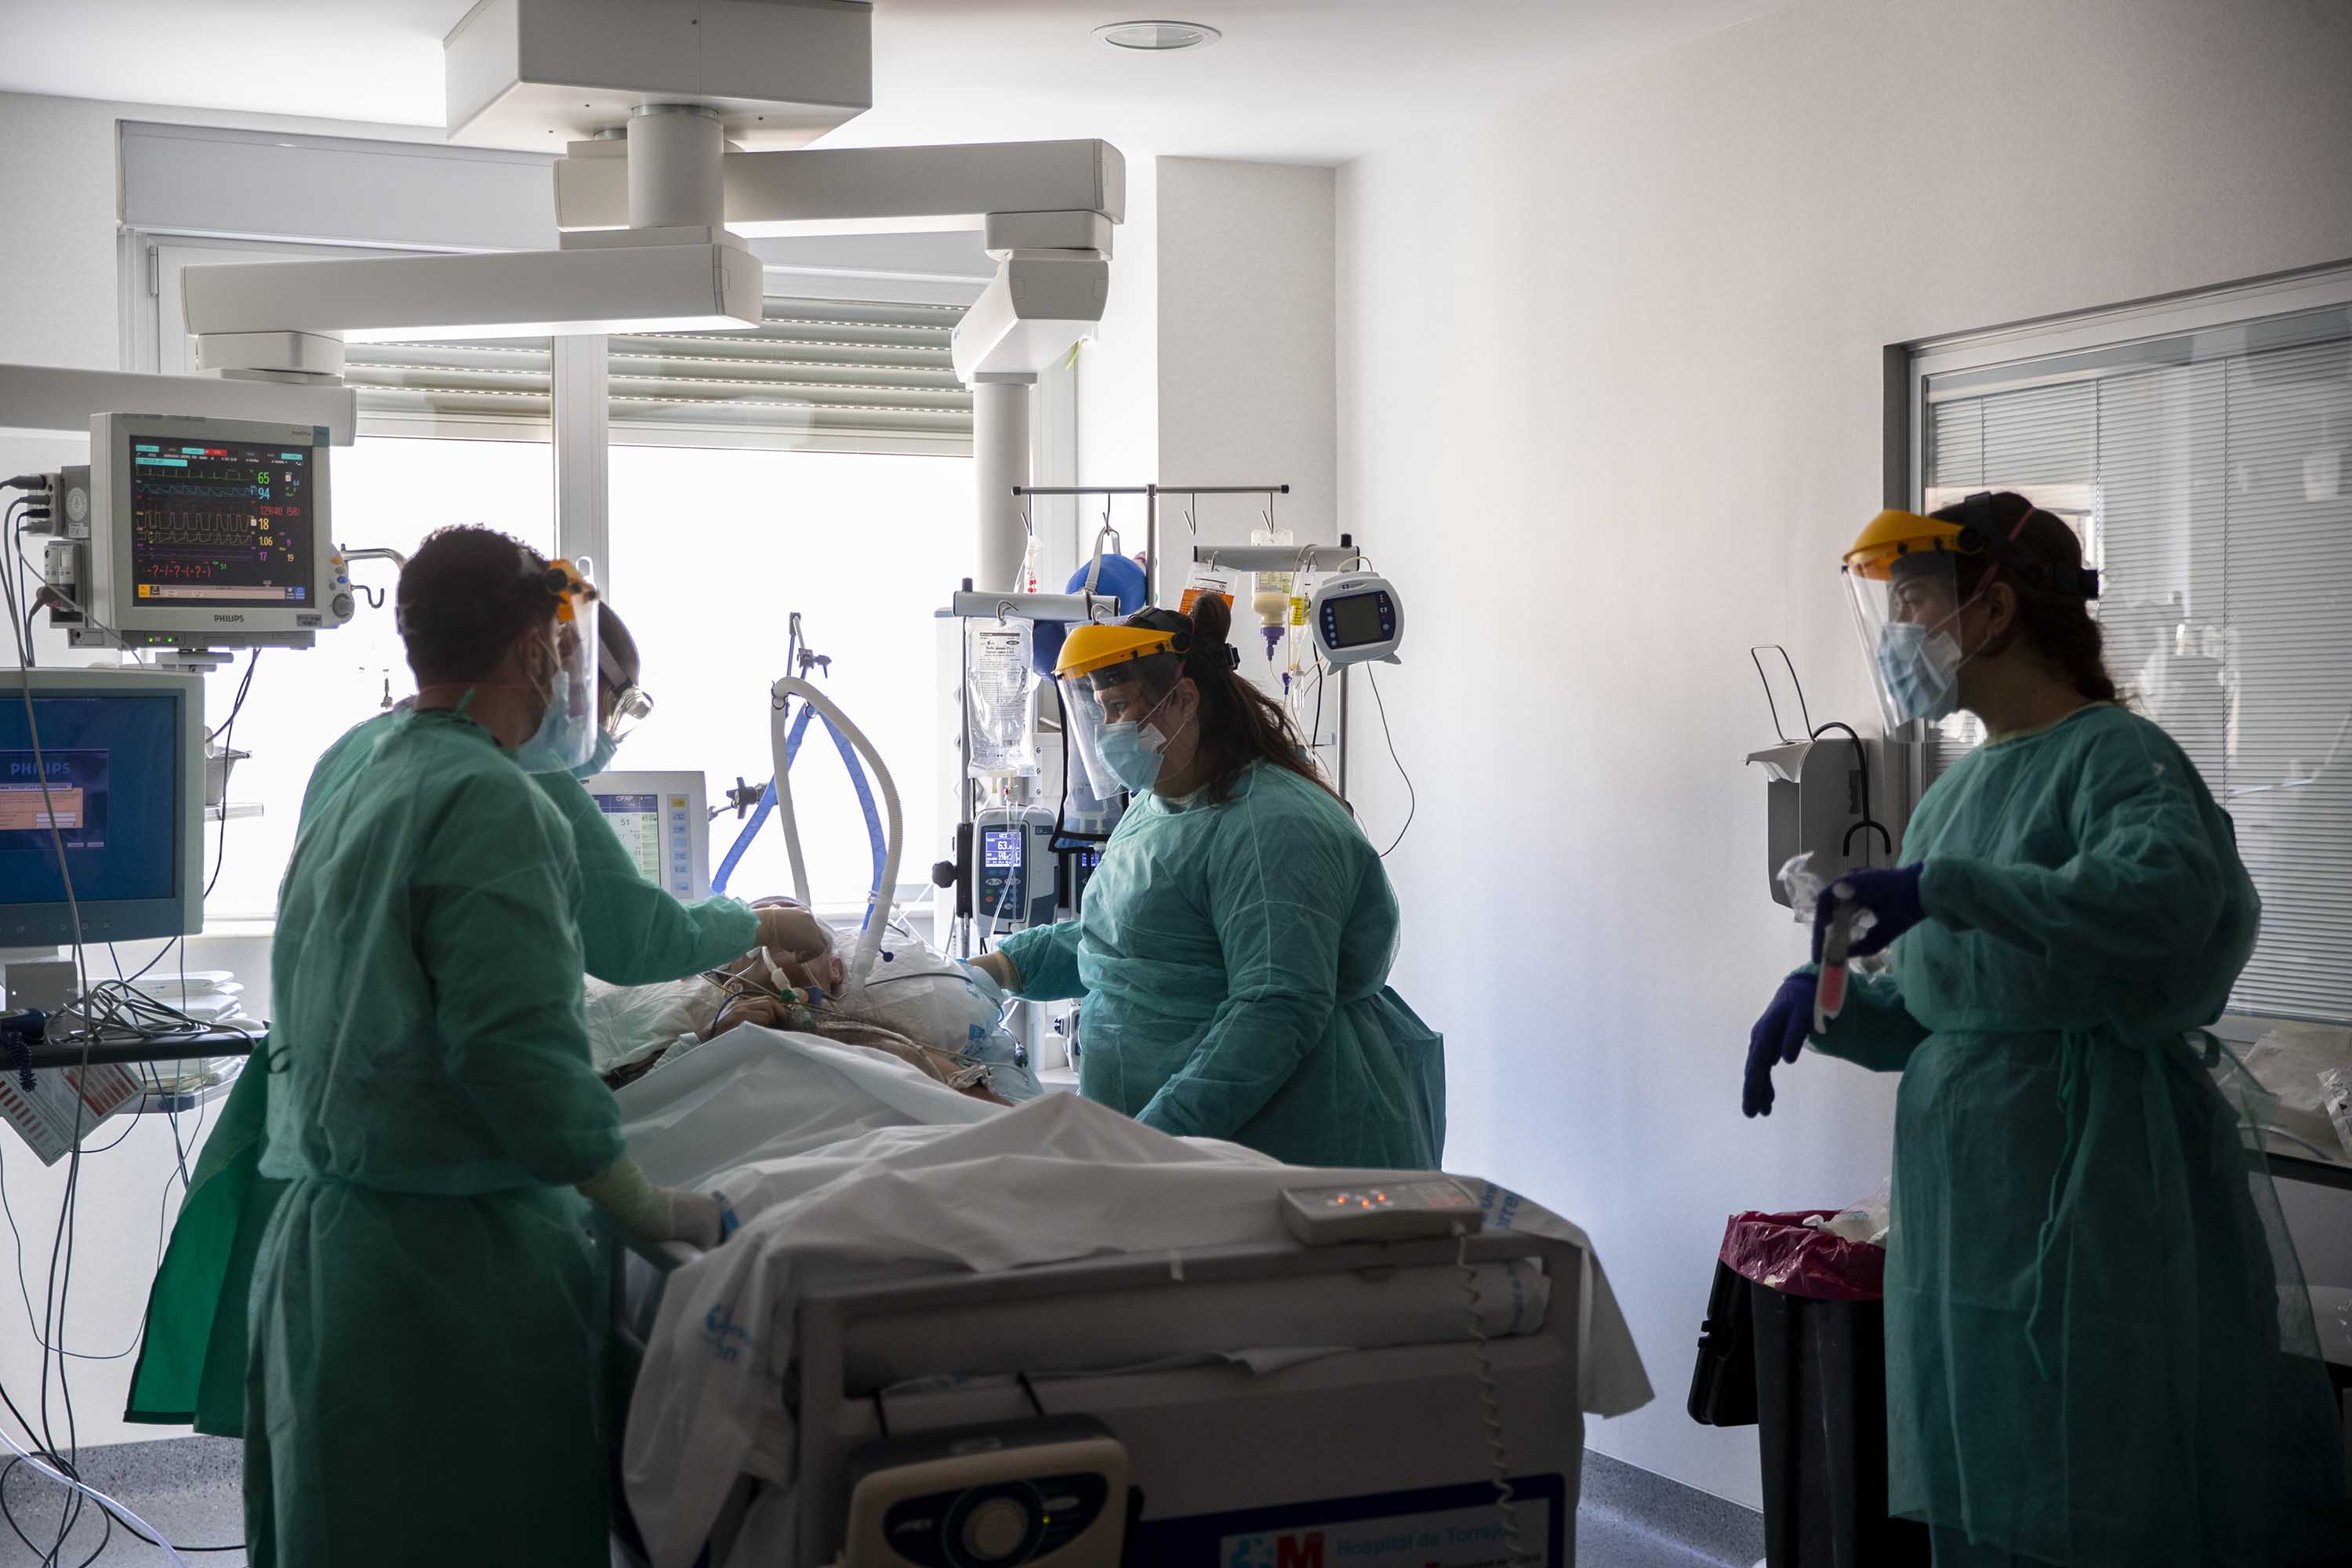 A patient infected with COVID-19 is treated in an intensive care unit at the University Hospital of Torrejon in Torrejon de Ardoz, Spain, on October 6.